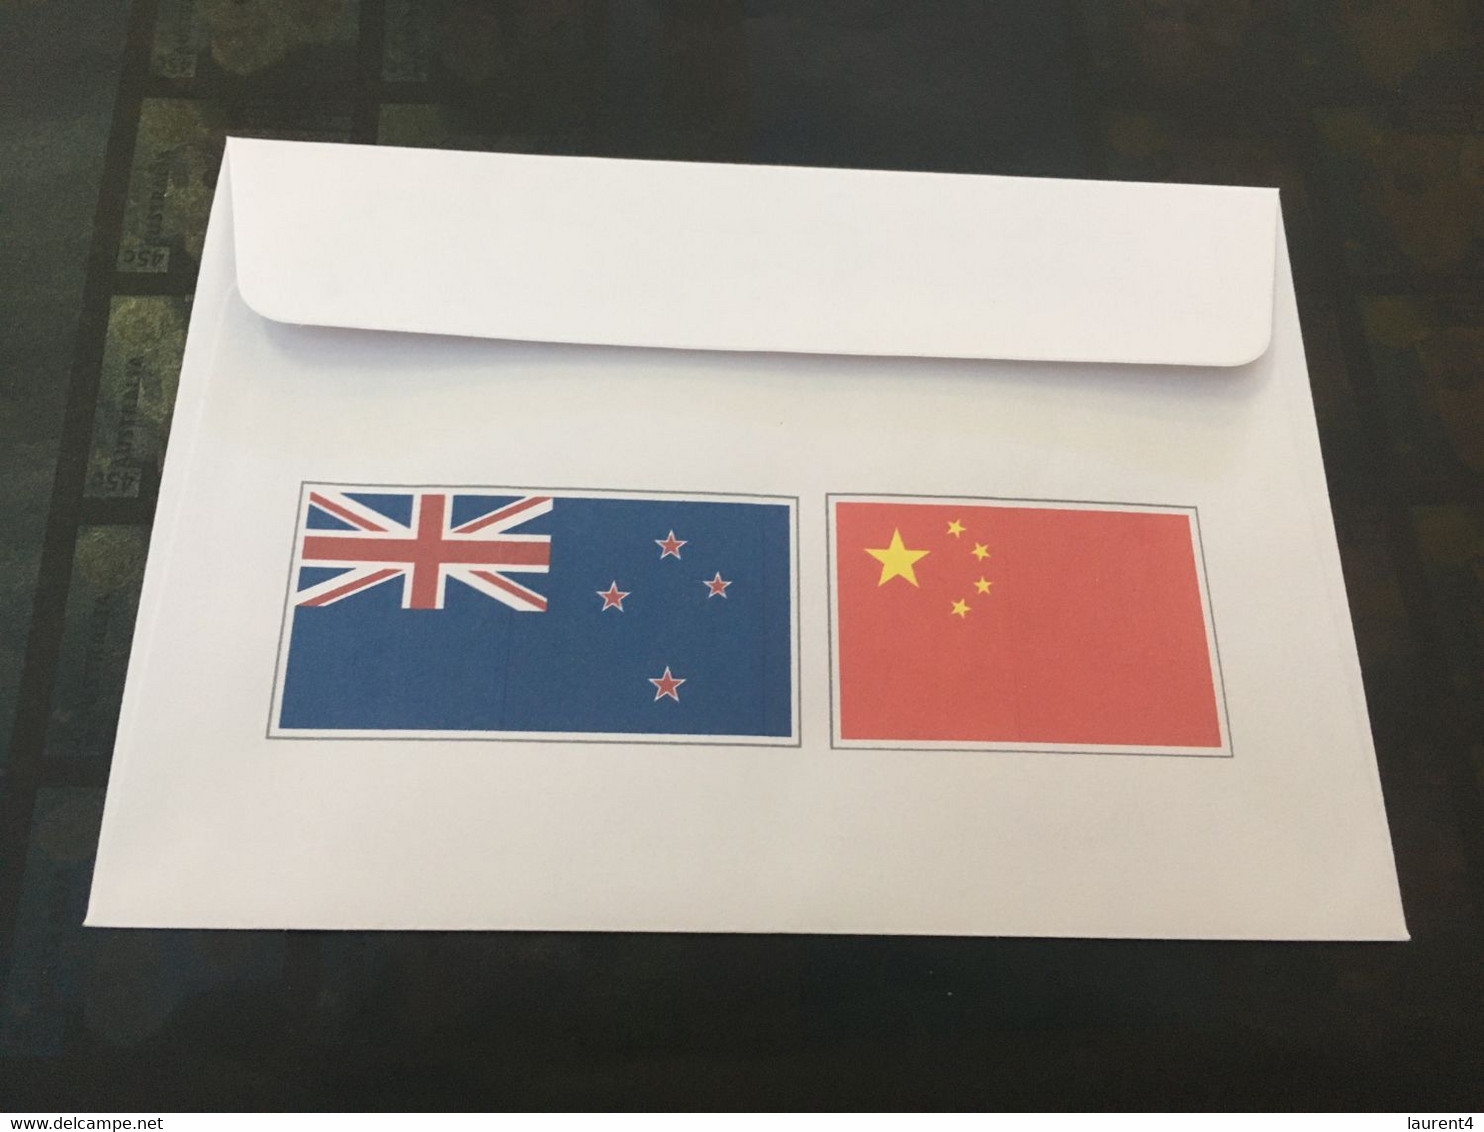 (5 D 21) 9-12-2021 - New Zealand Diplomatic (boycott) Of China 2022 Winter Olympic Games Announced (China Flag UN Stamp) - Inverno 2022 : Pechino